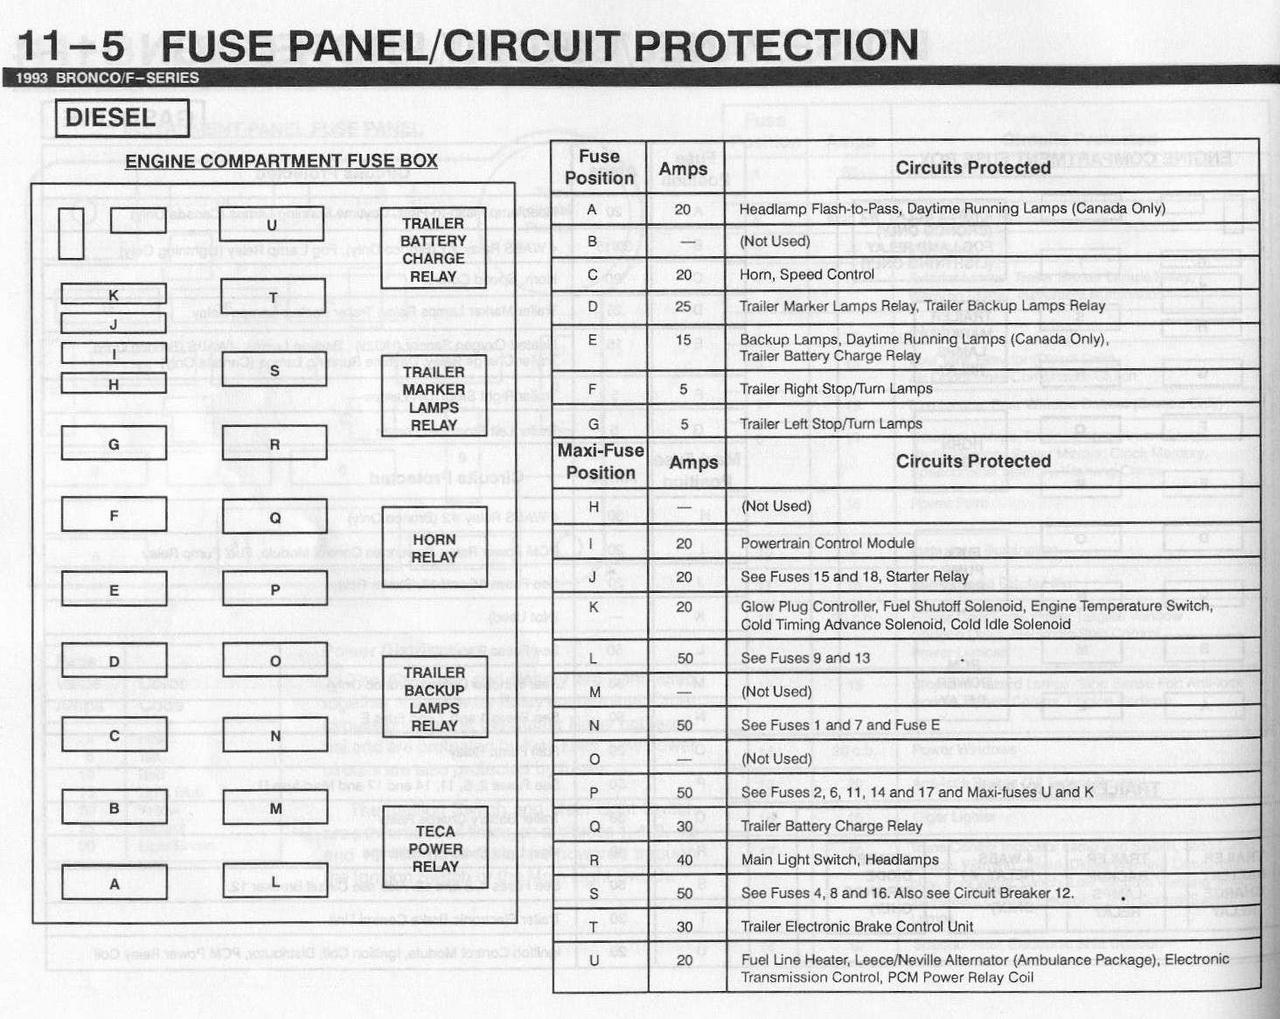 Underhood Relay/fuse box listing needed - Ford Truck Enthusiasts Forums